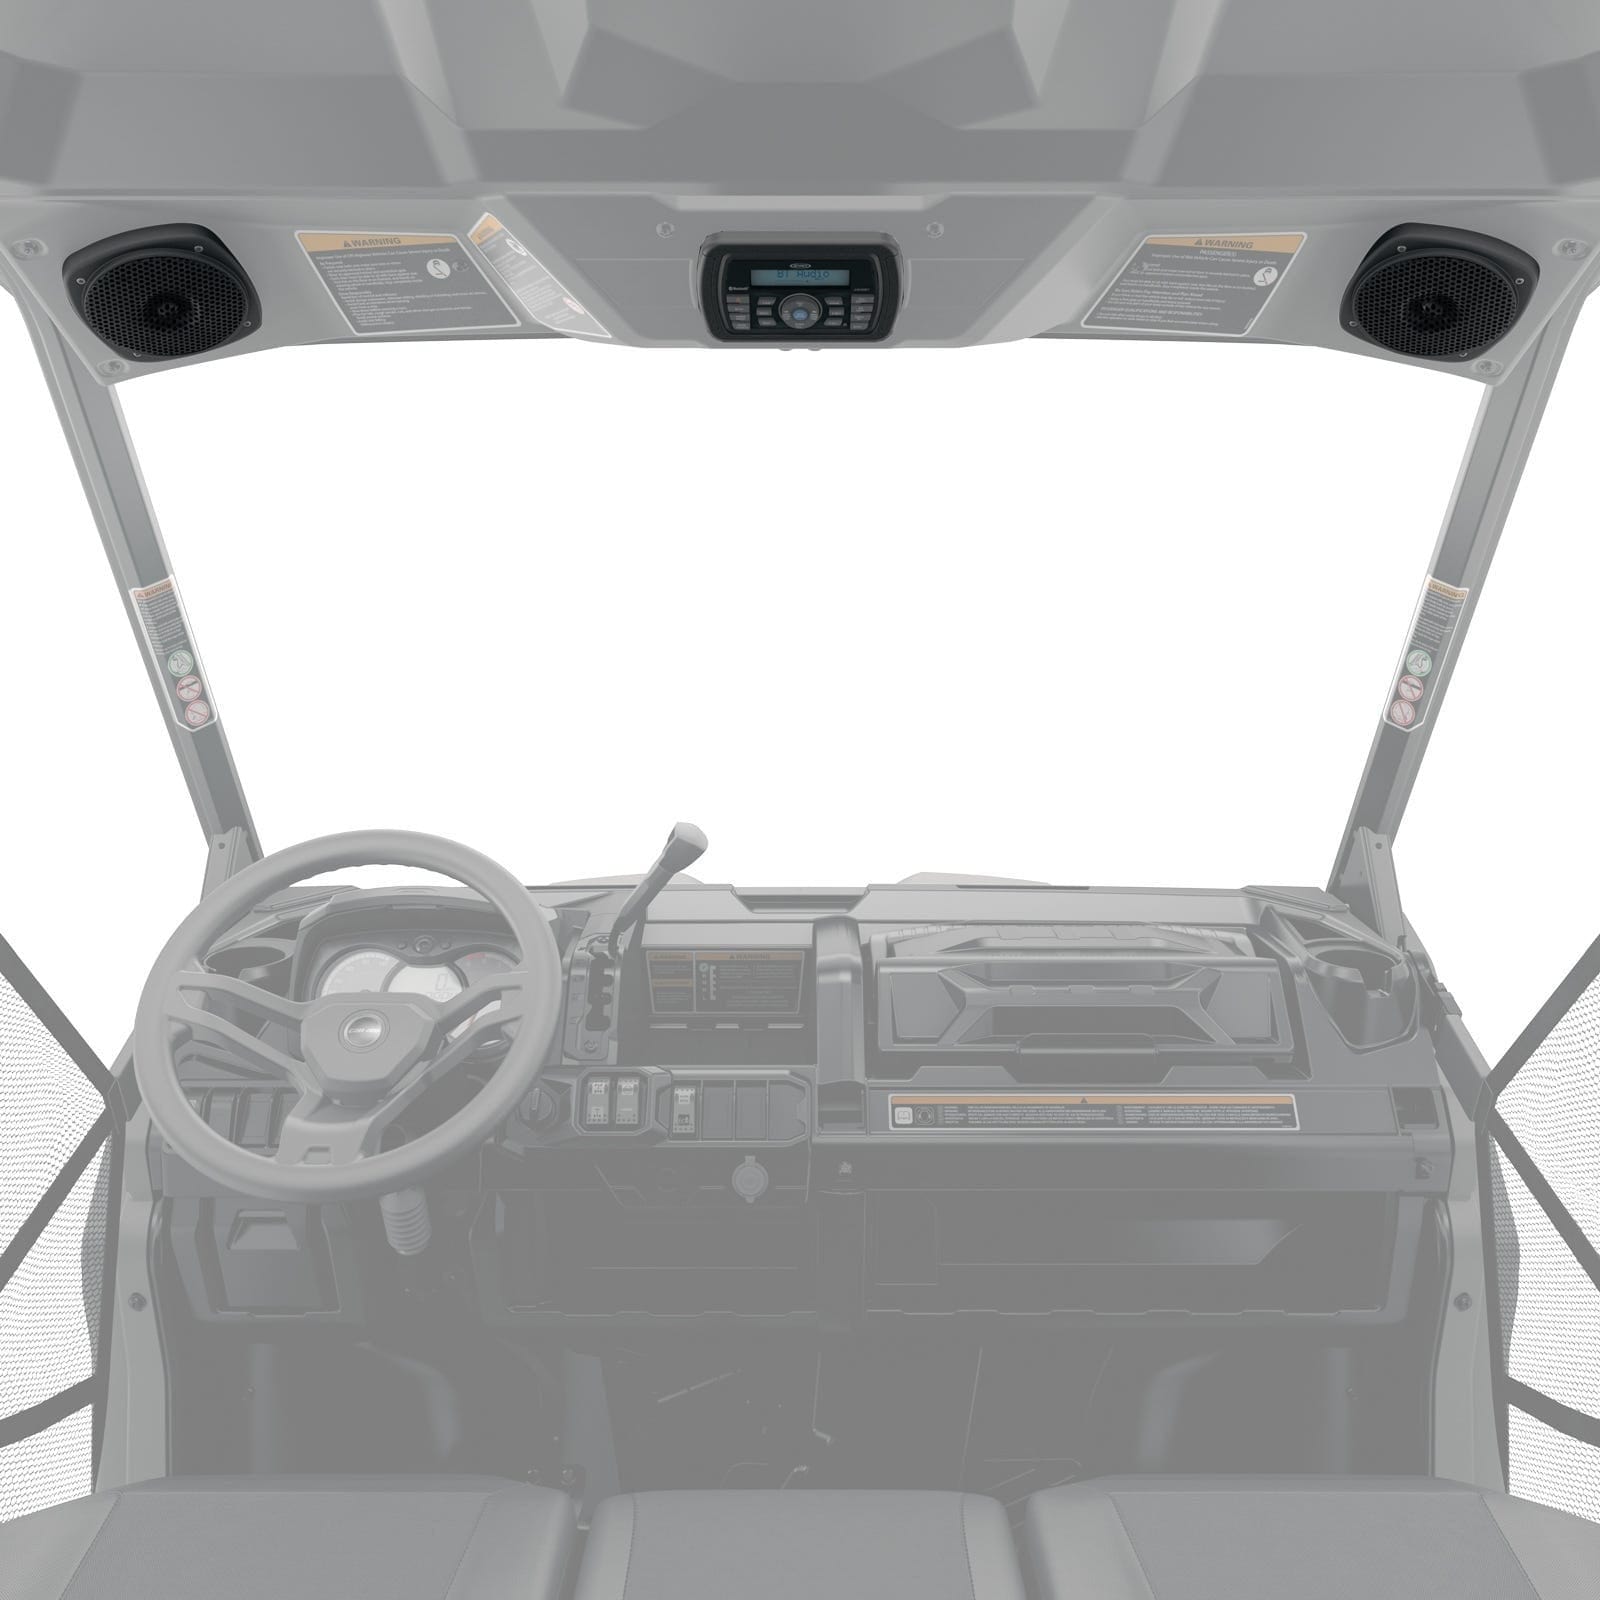 Complete Overhead Audio System - Propowersports.ca